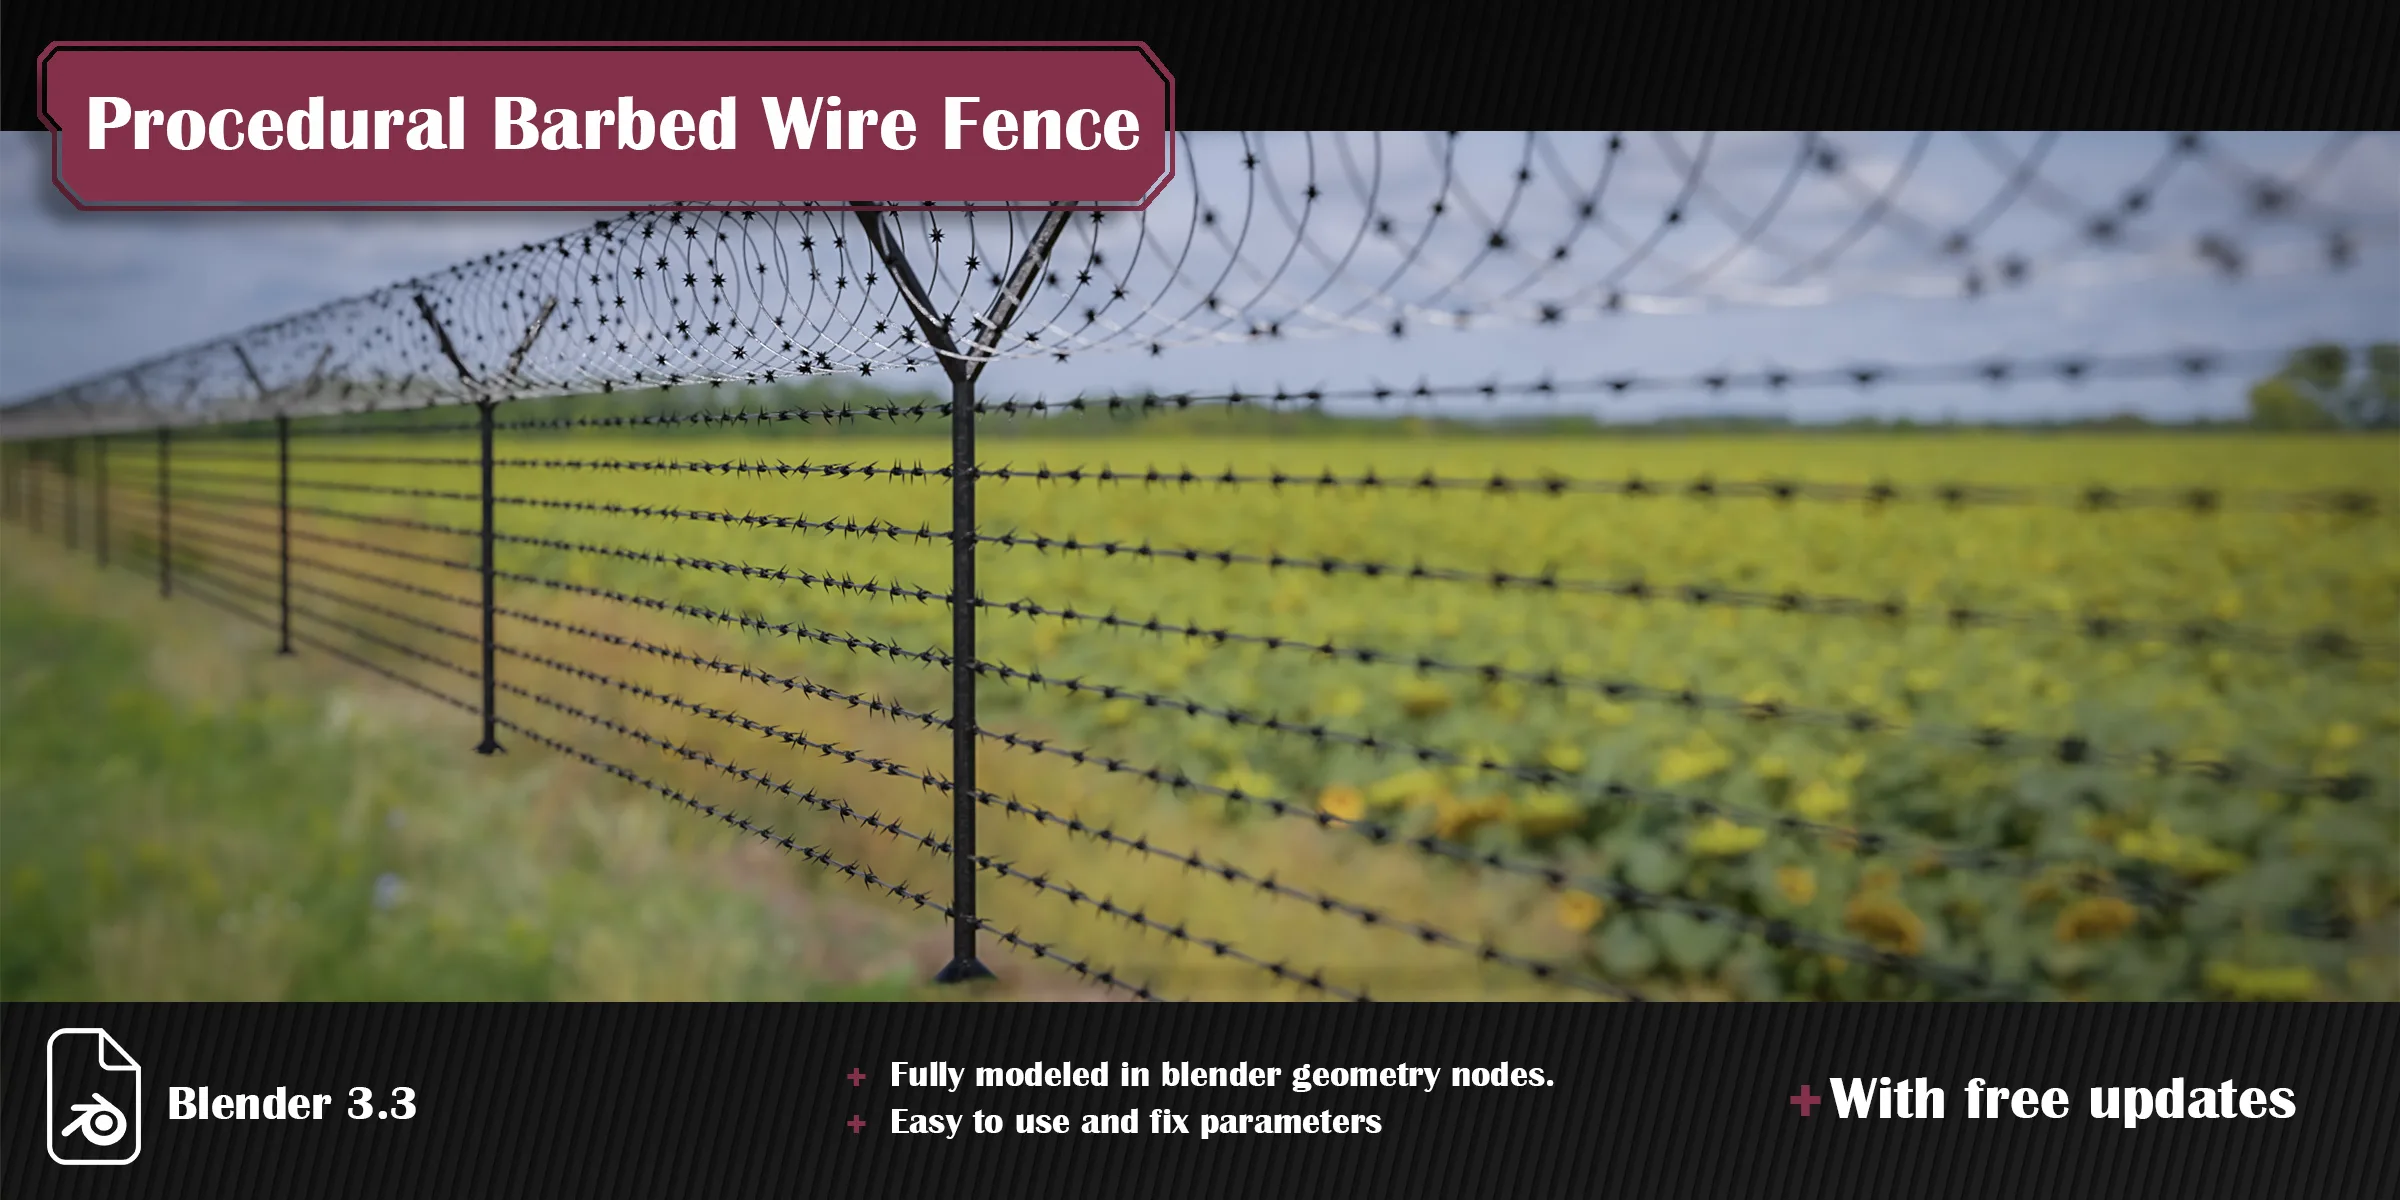 Procedural Barbed Wire Fence